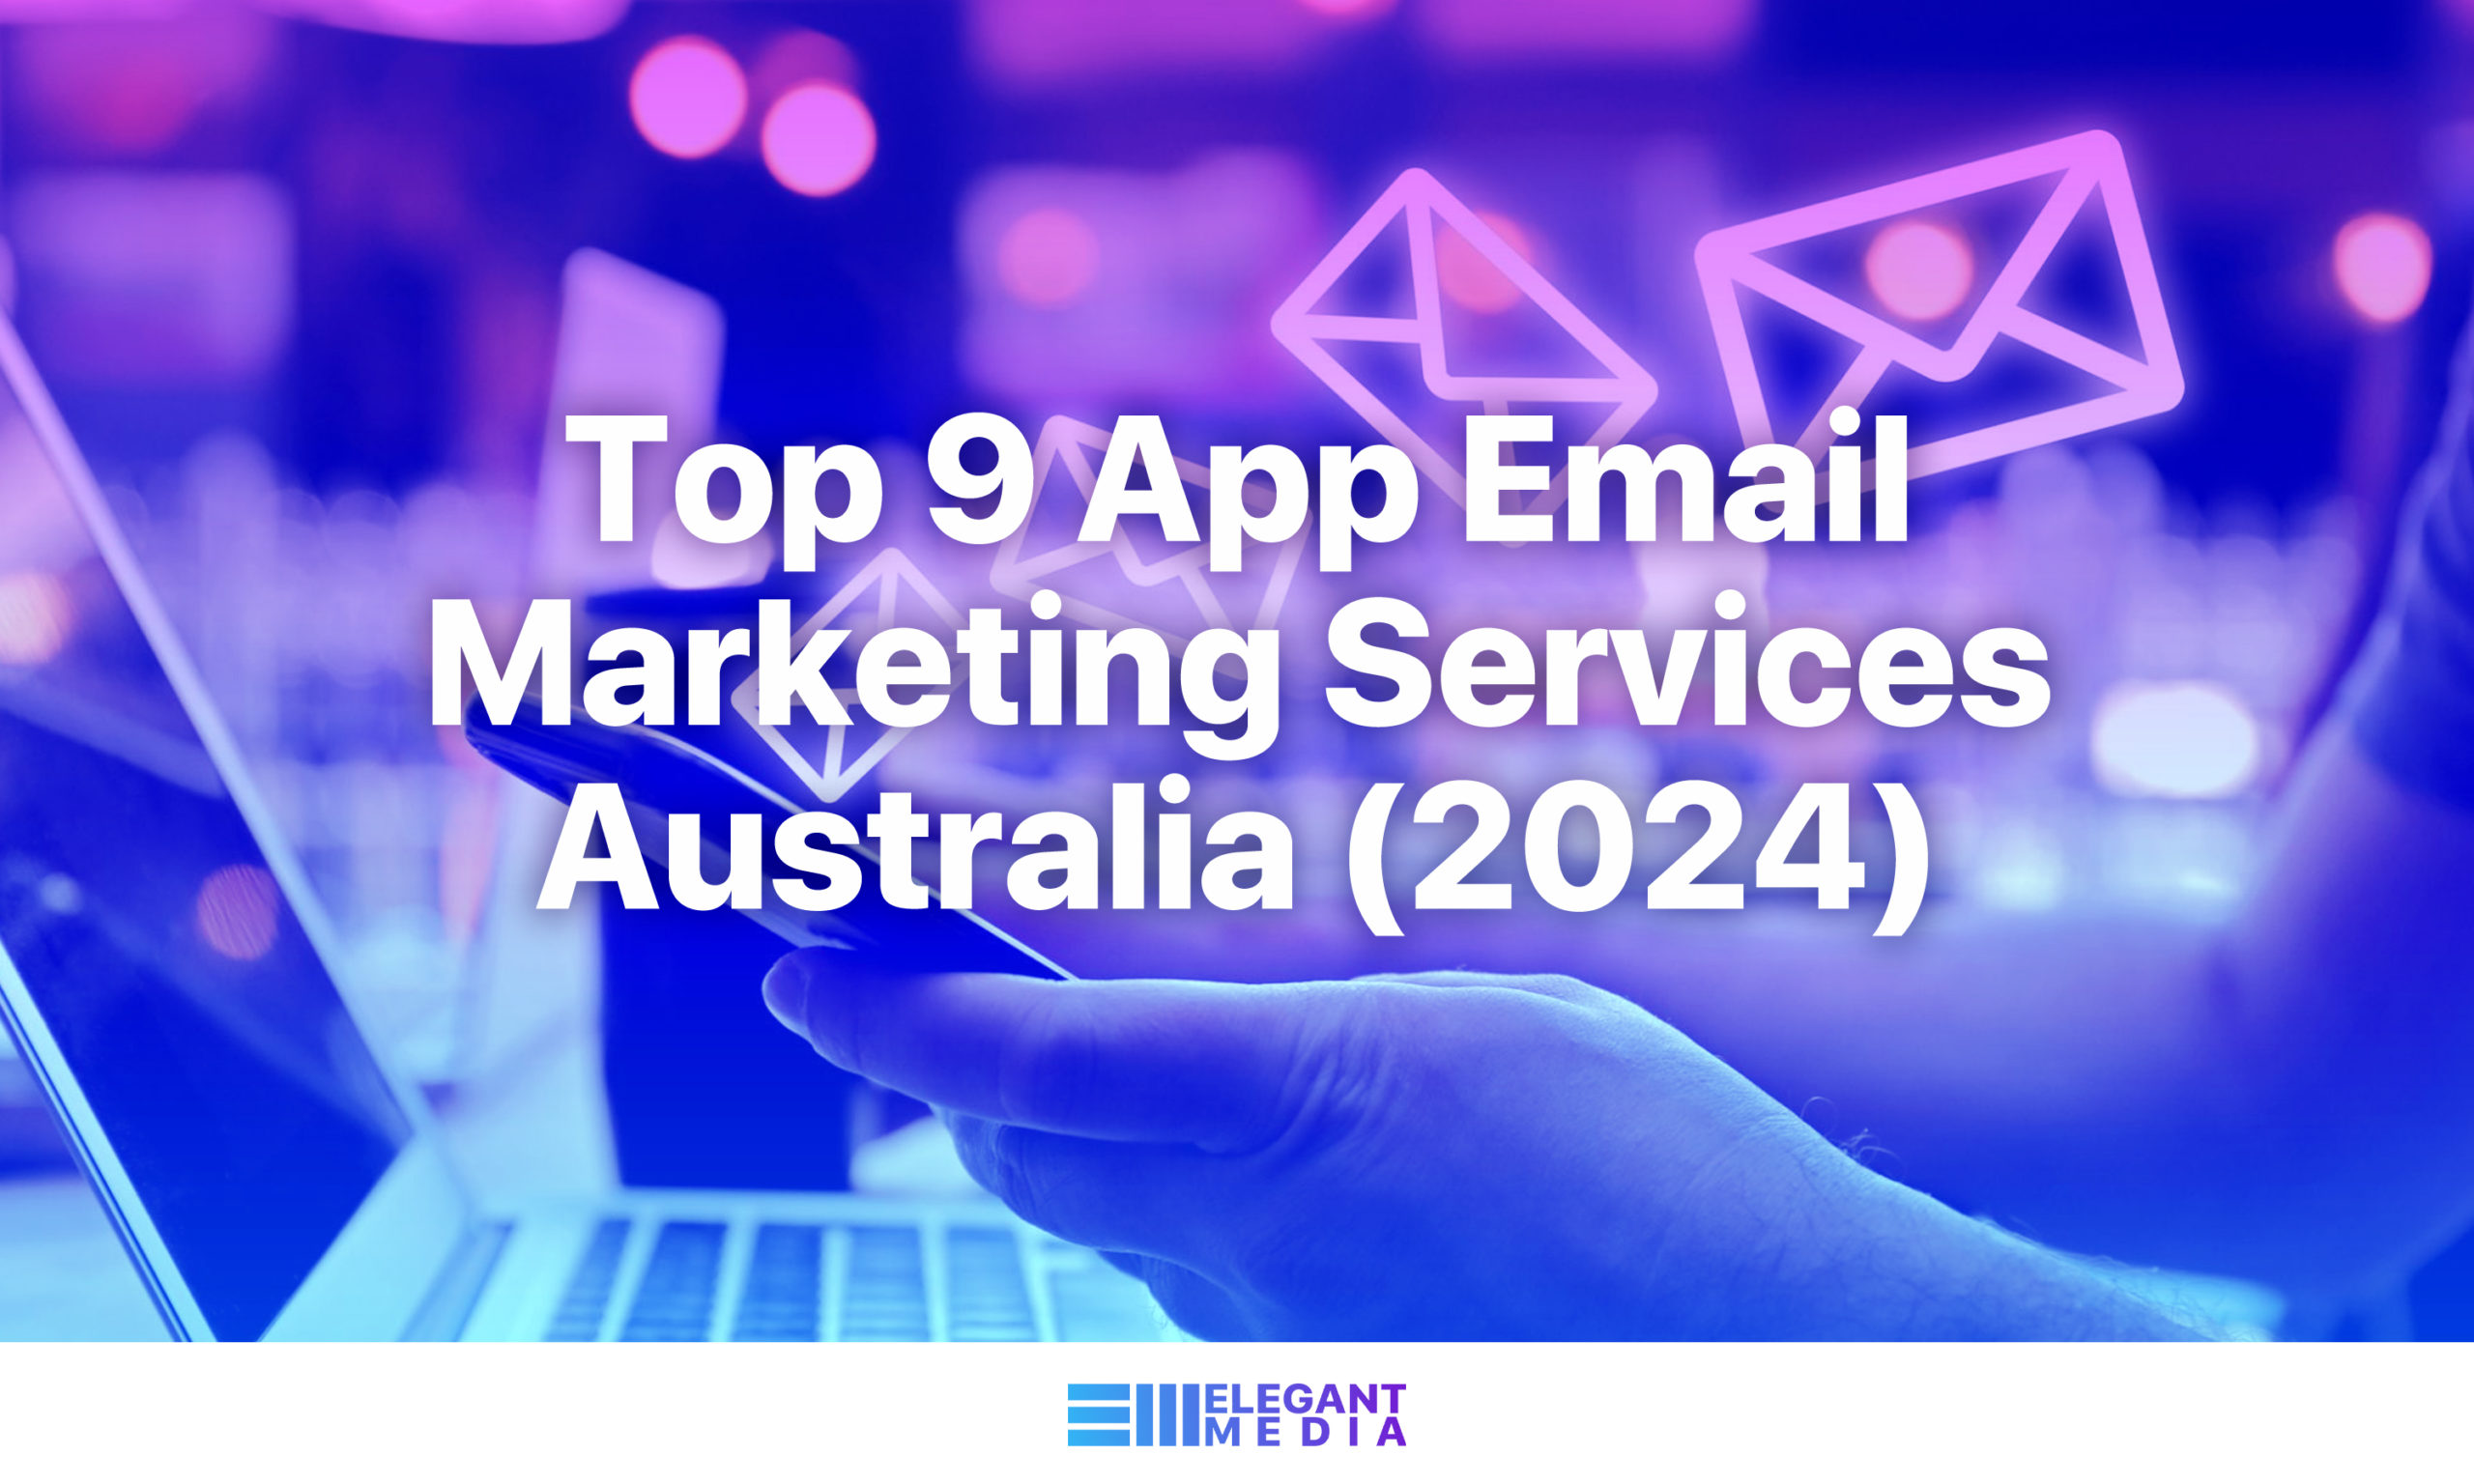 Top 9 App Email Marketing Services Australia (2024)